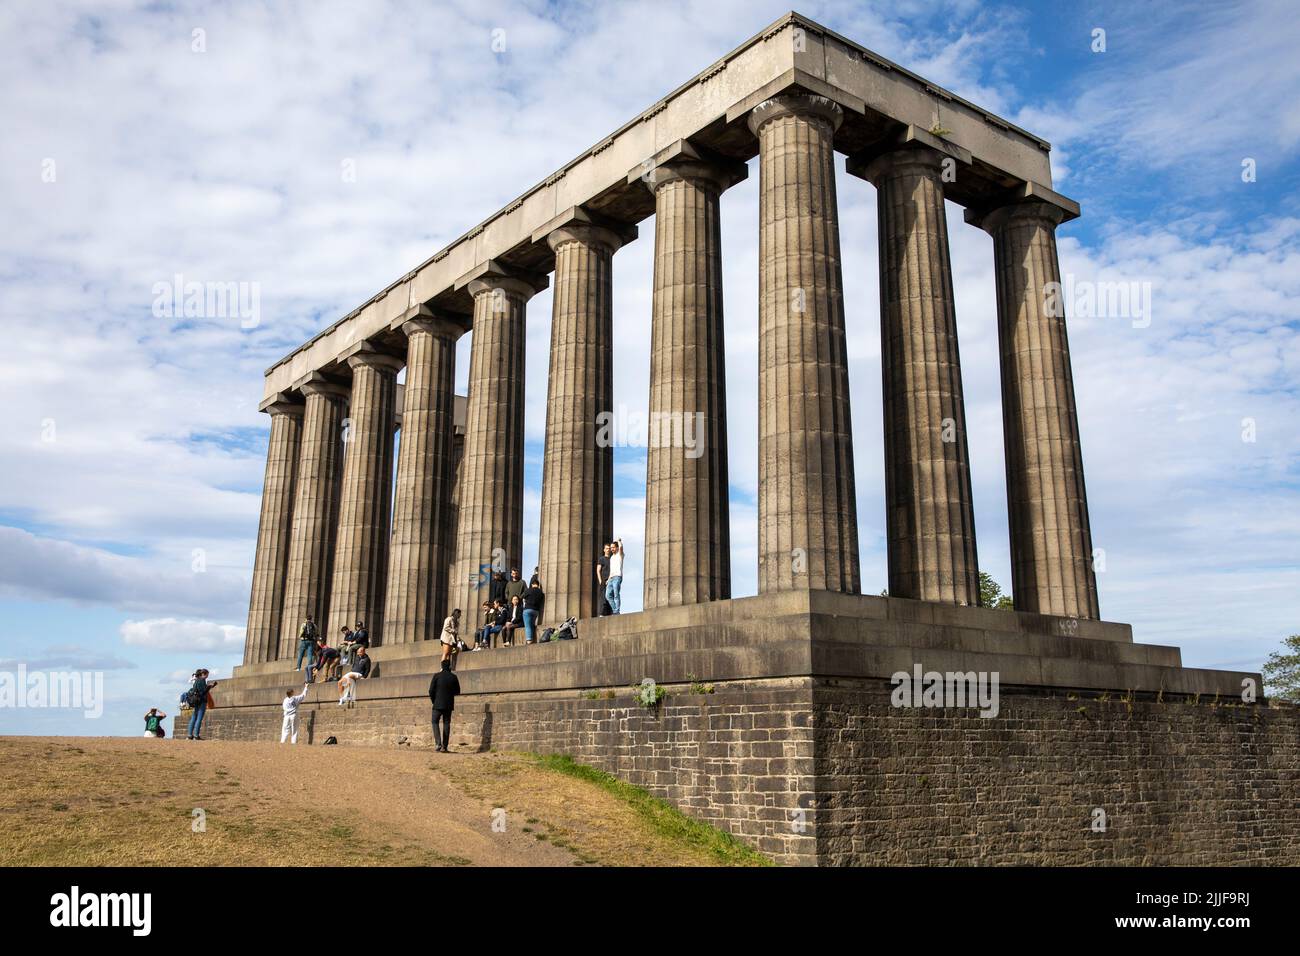 The National Monument of Scotland on Calton Hill Edinburgh, based on the Pantheon to remember Scottish soldiers perished in the Napoleonic Wars,UK. Stock Photo